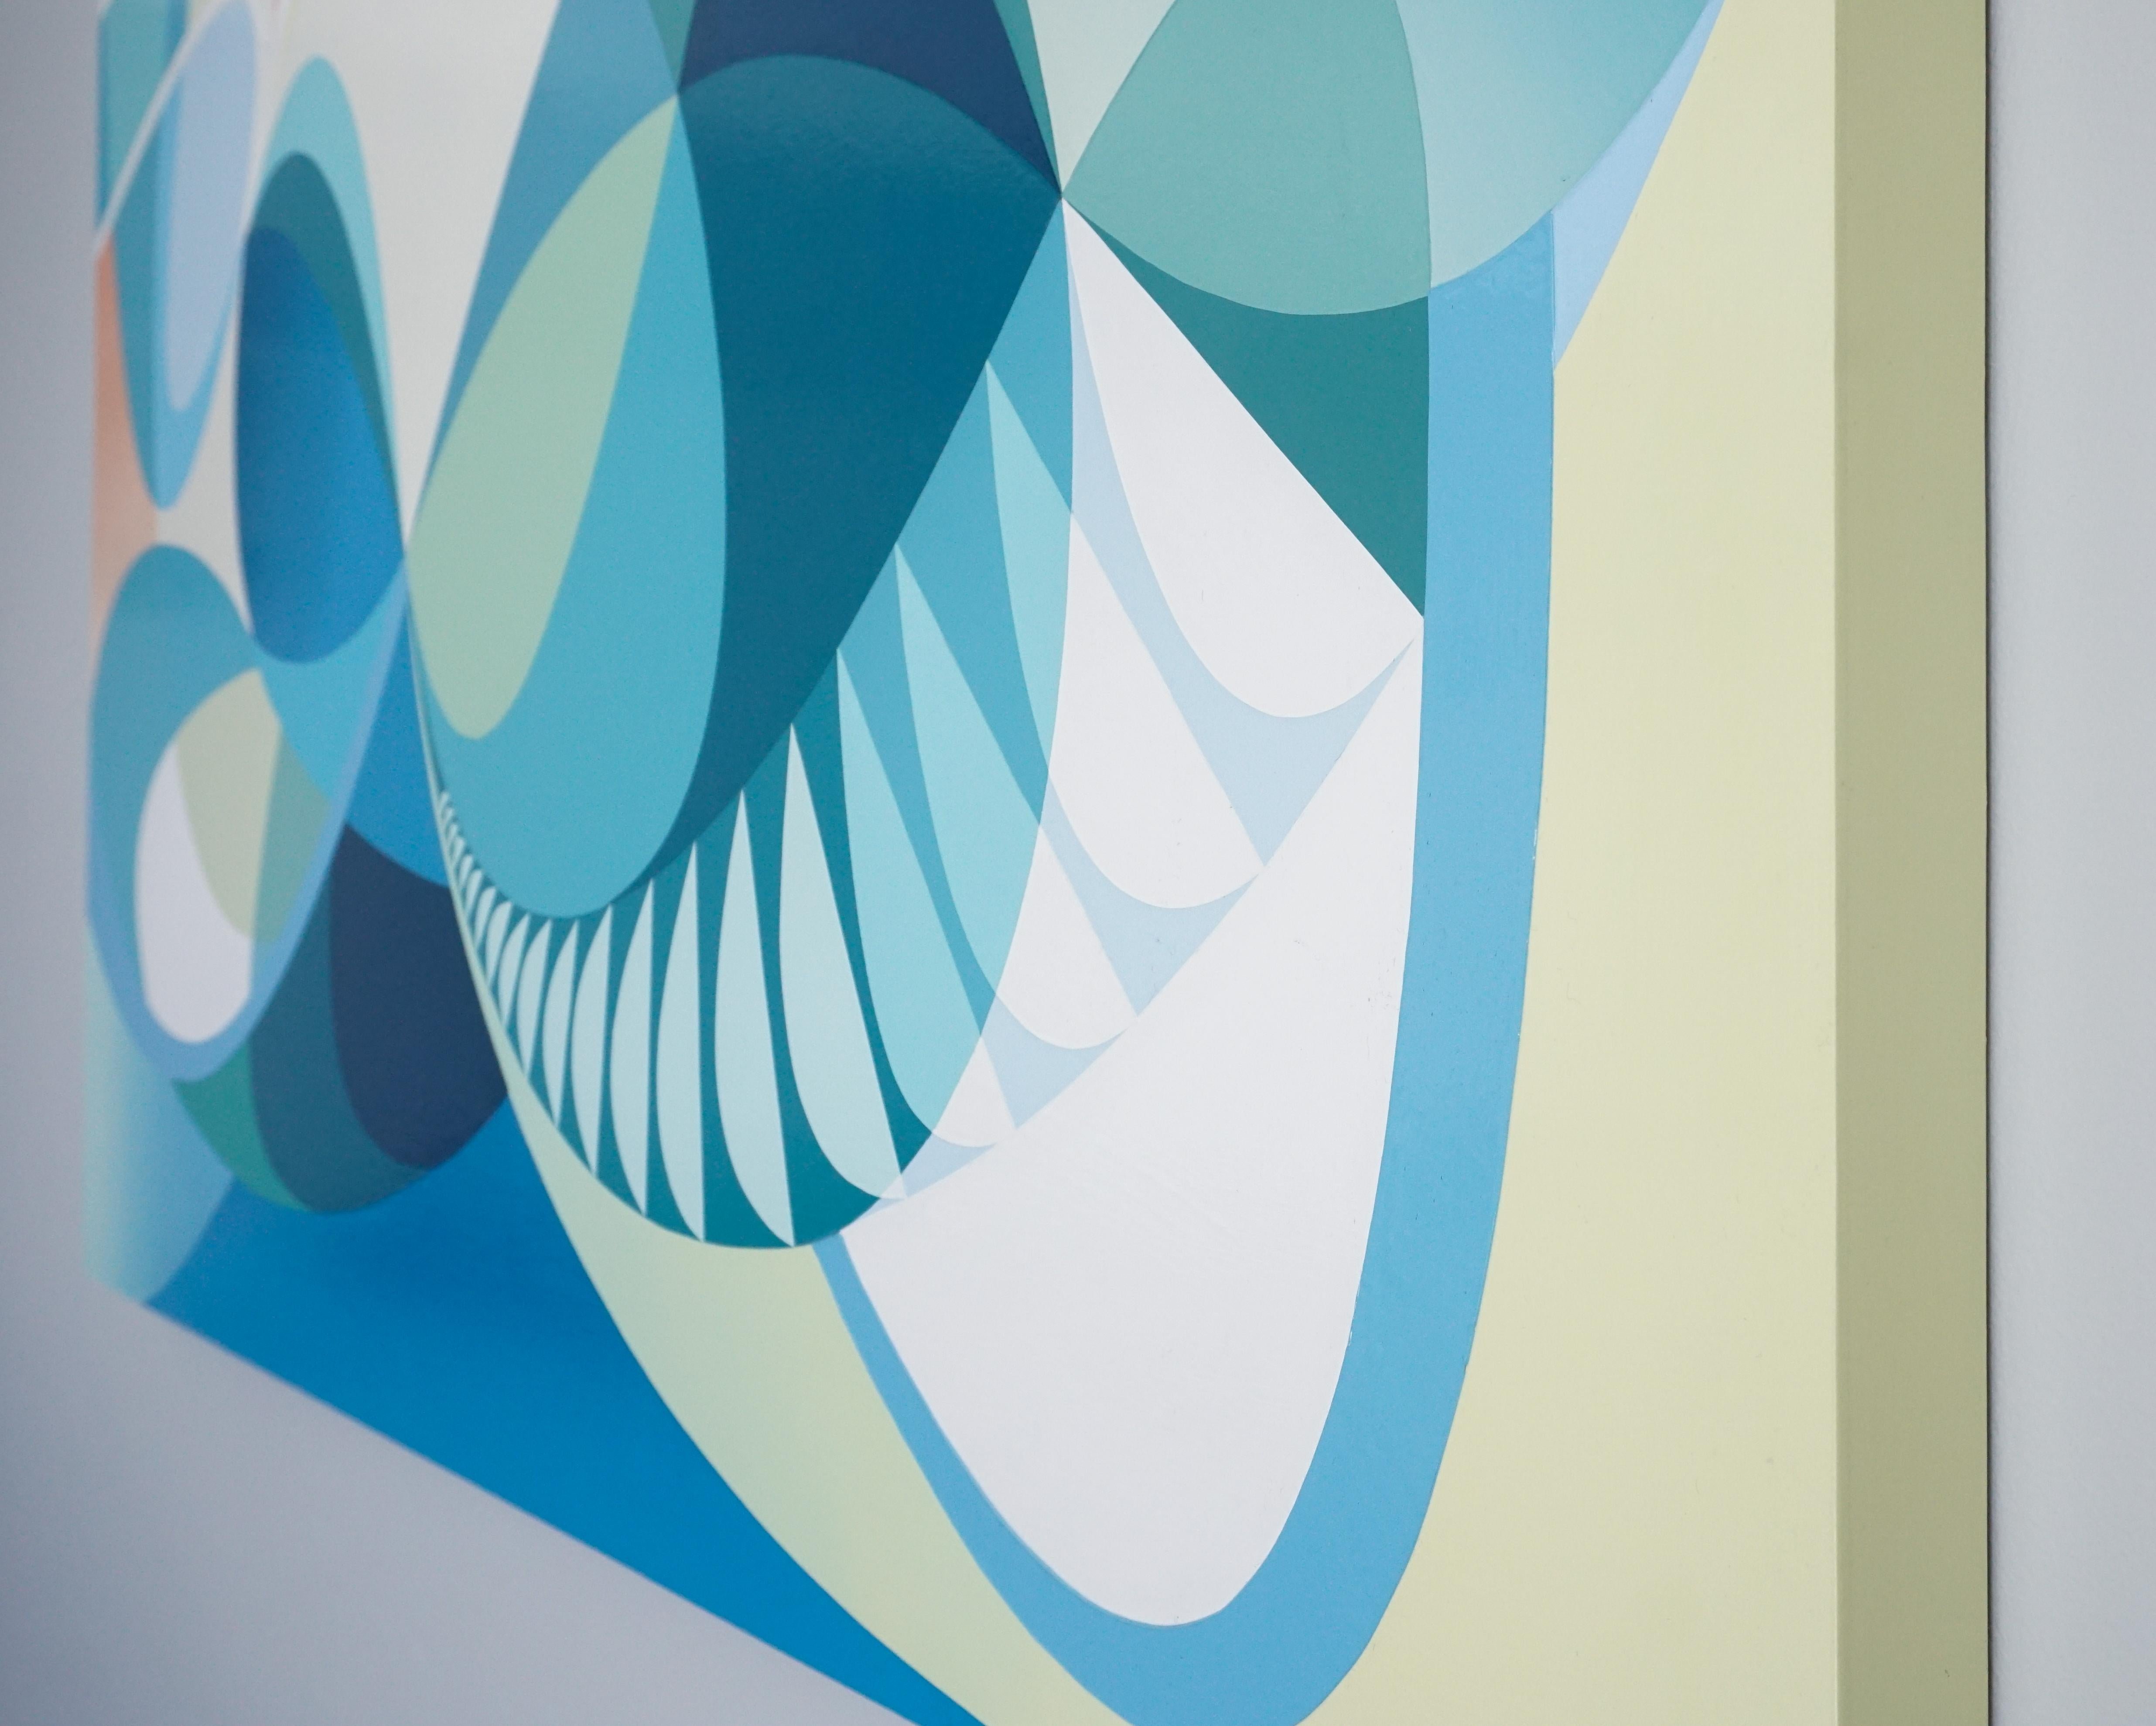 In this work, Michelle Weddle utilizes line, color, and form to create a painting which acts at the balance between the nonobjective and representational. Using shades of blues, pinks, and oranges in looping shapes, she intuitively expresses an